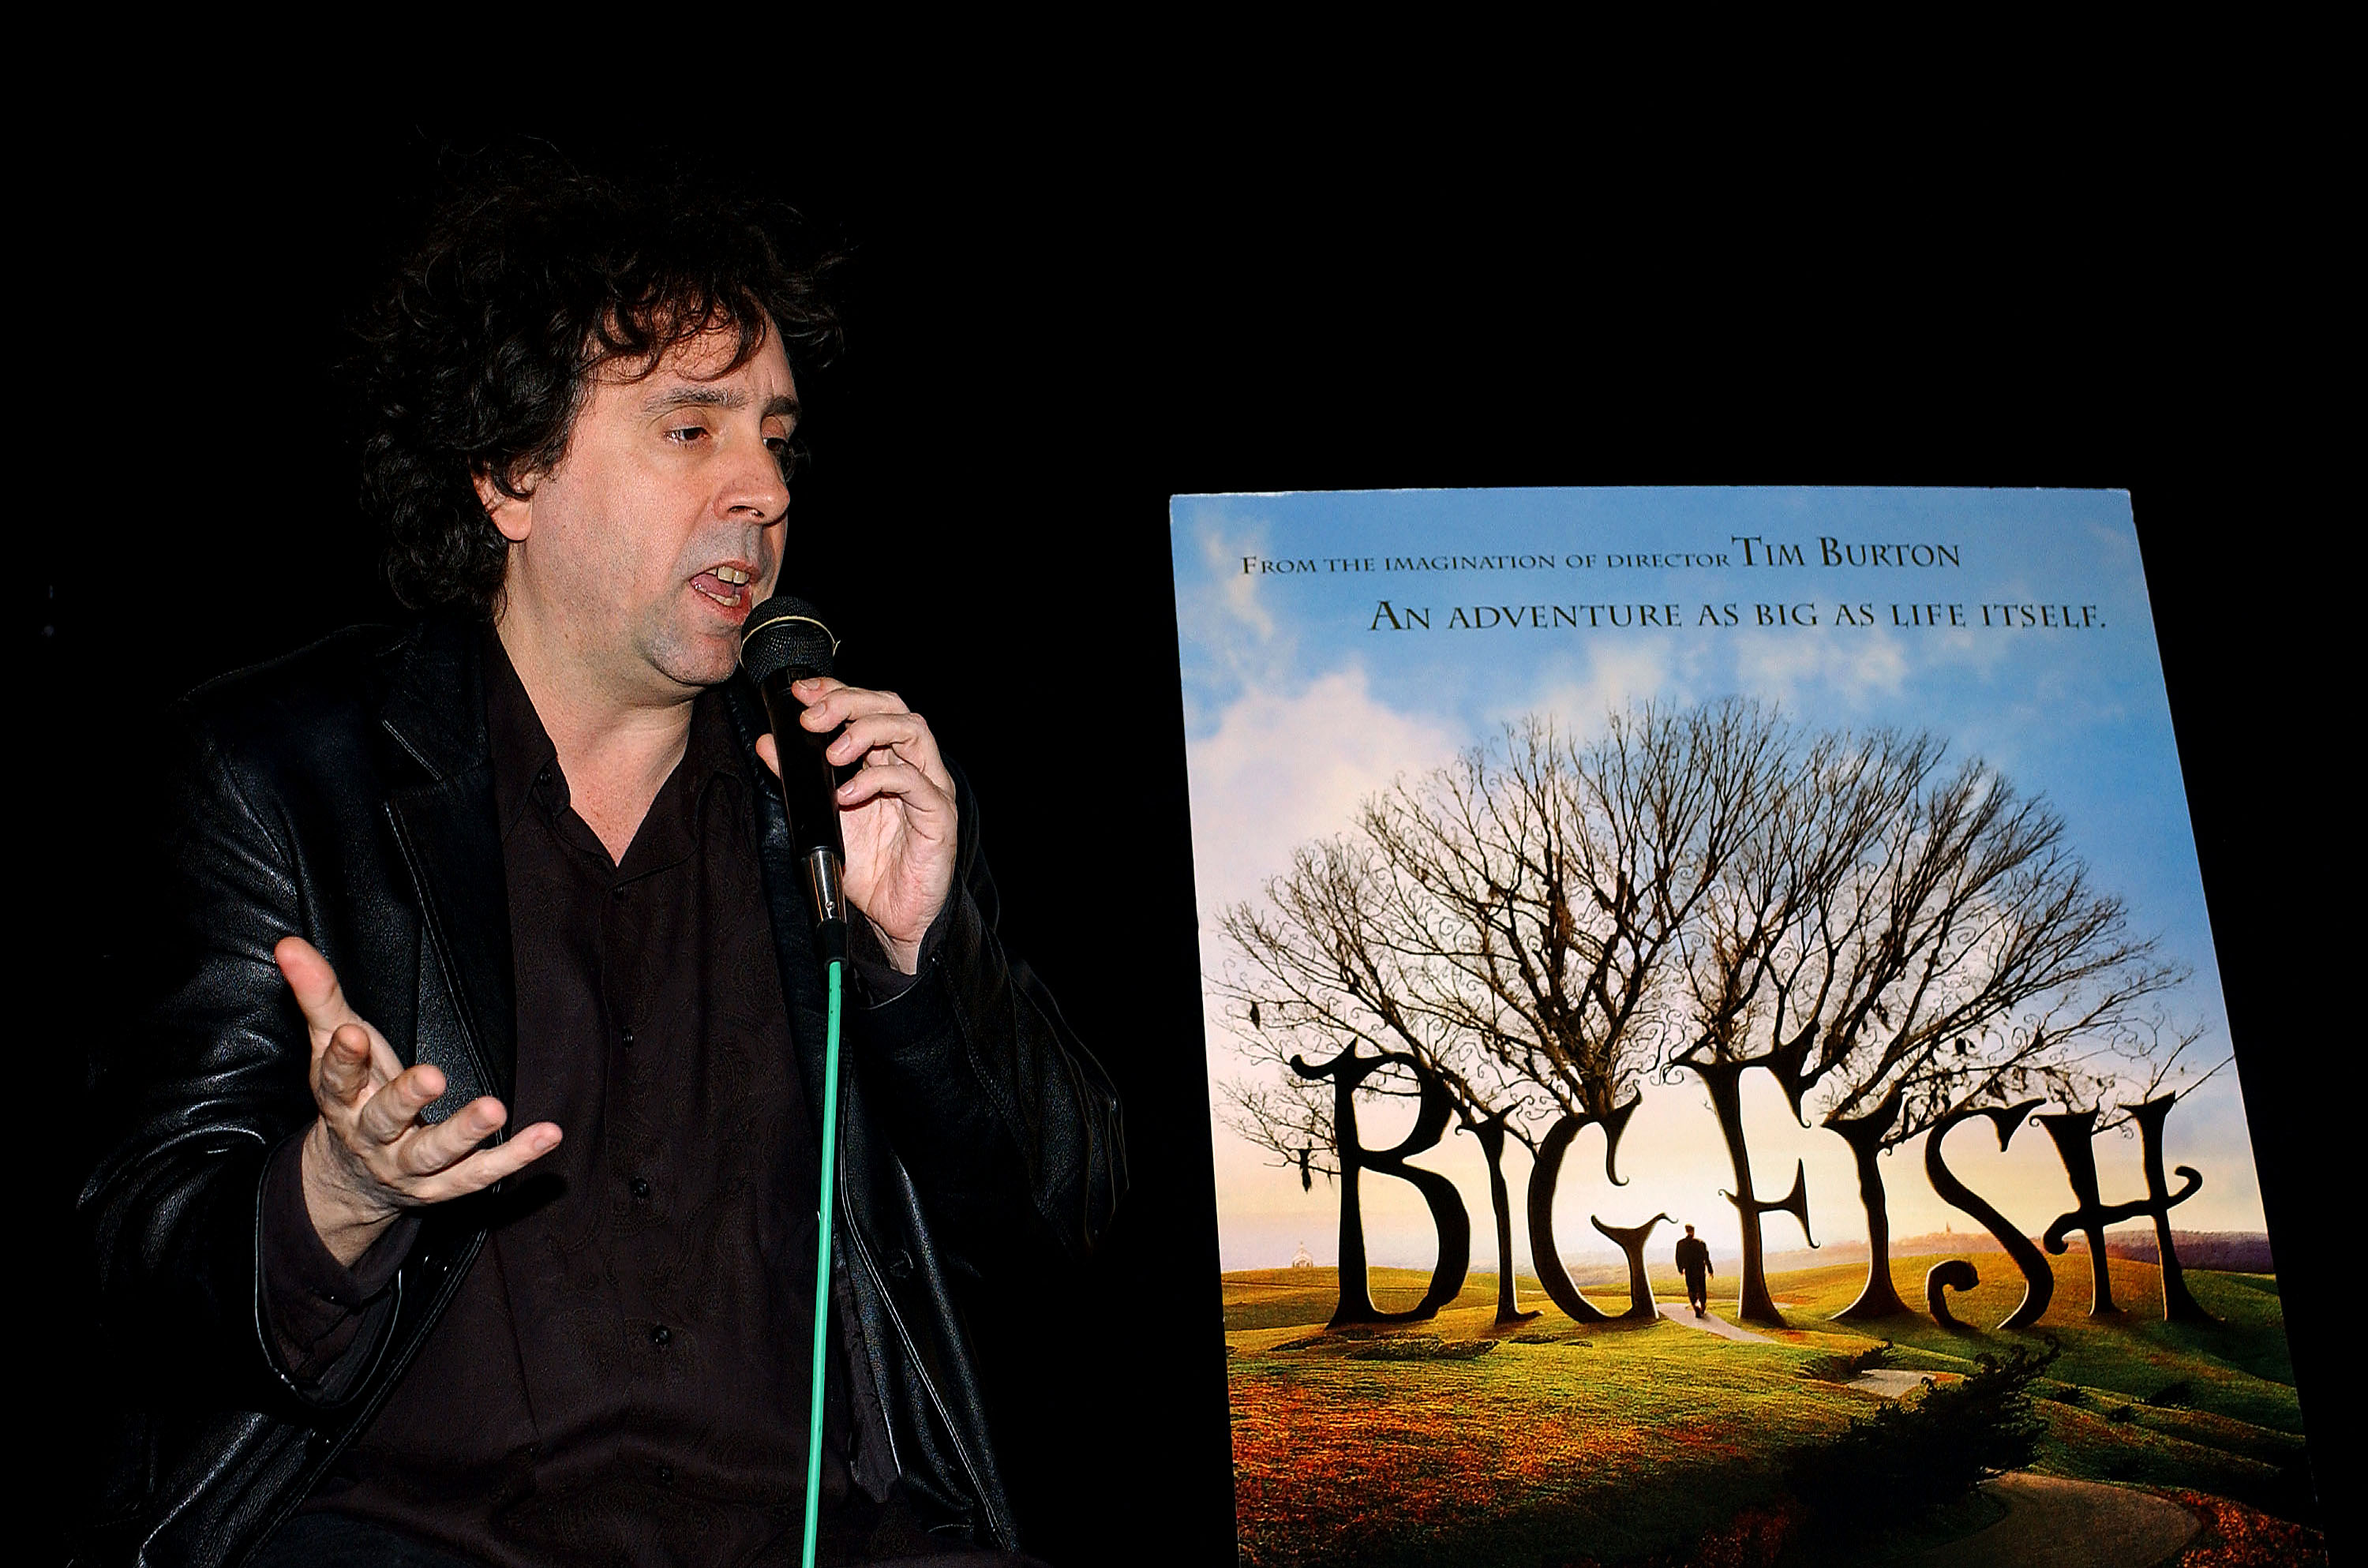 Tim Burton discusses his film "Big Fish" following a special sneak preview at The Egyptian Theatre on December 9, 2003, in Hollywood, California. | Source: Getty Images